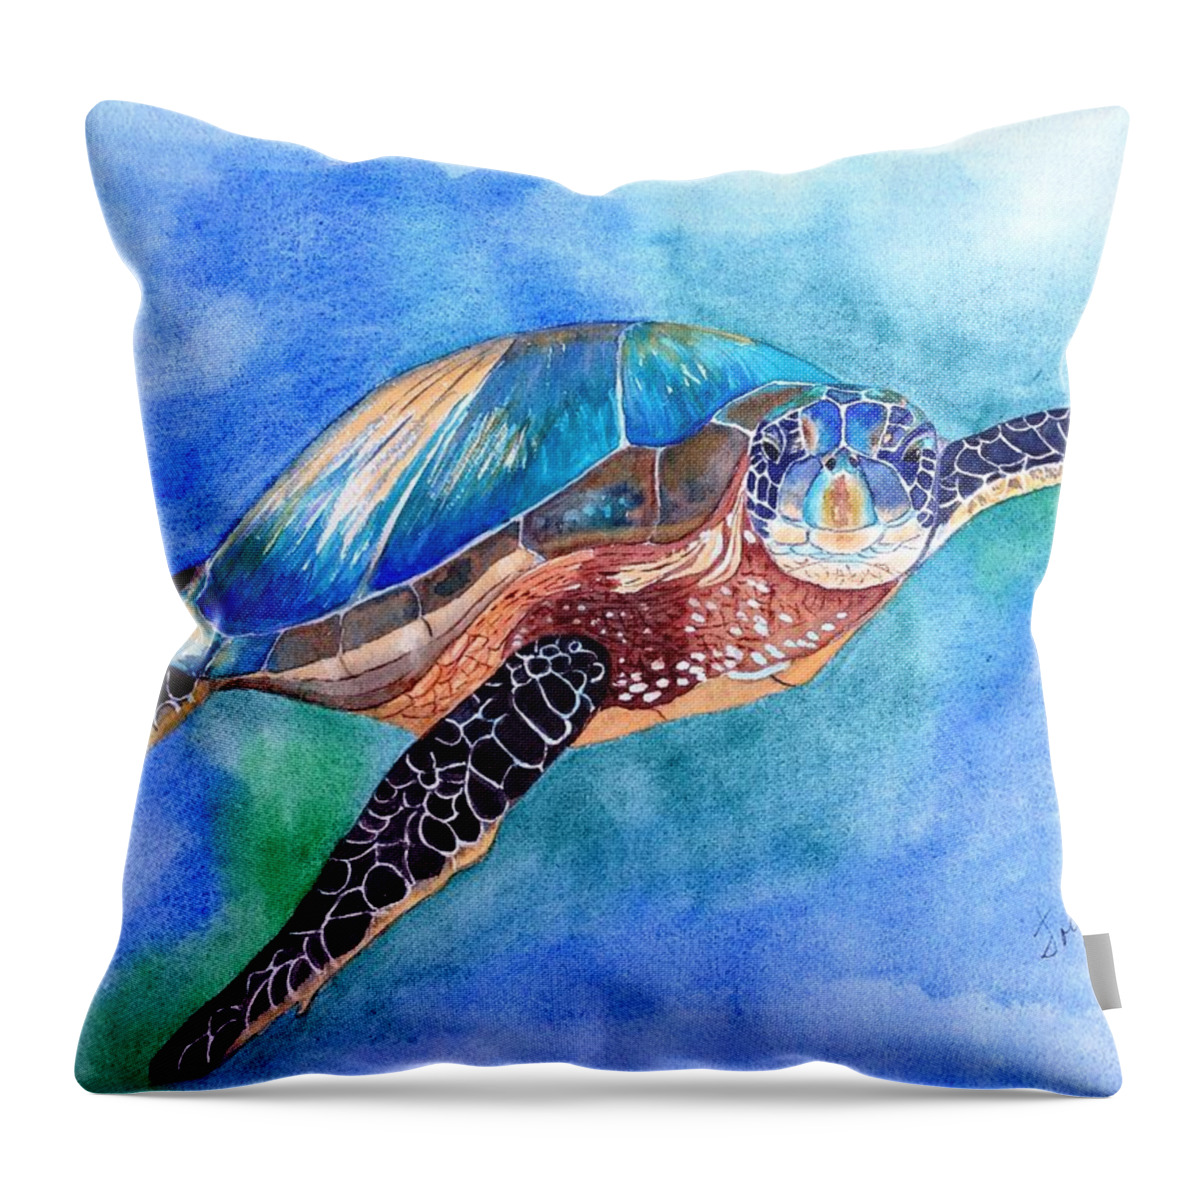 Sea Turtle Throw Pillow featuring the painting Ocean Jewel by Joette Snyder